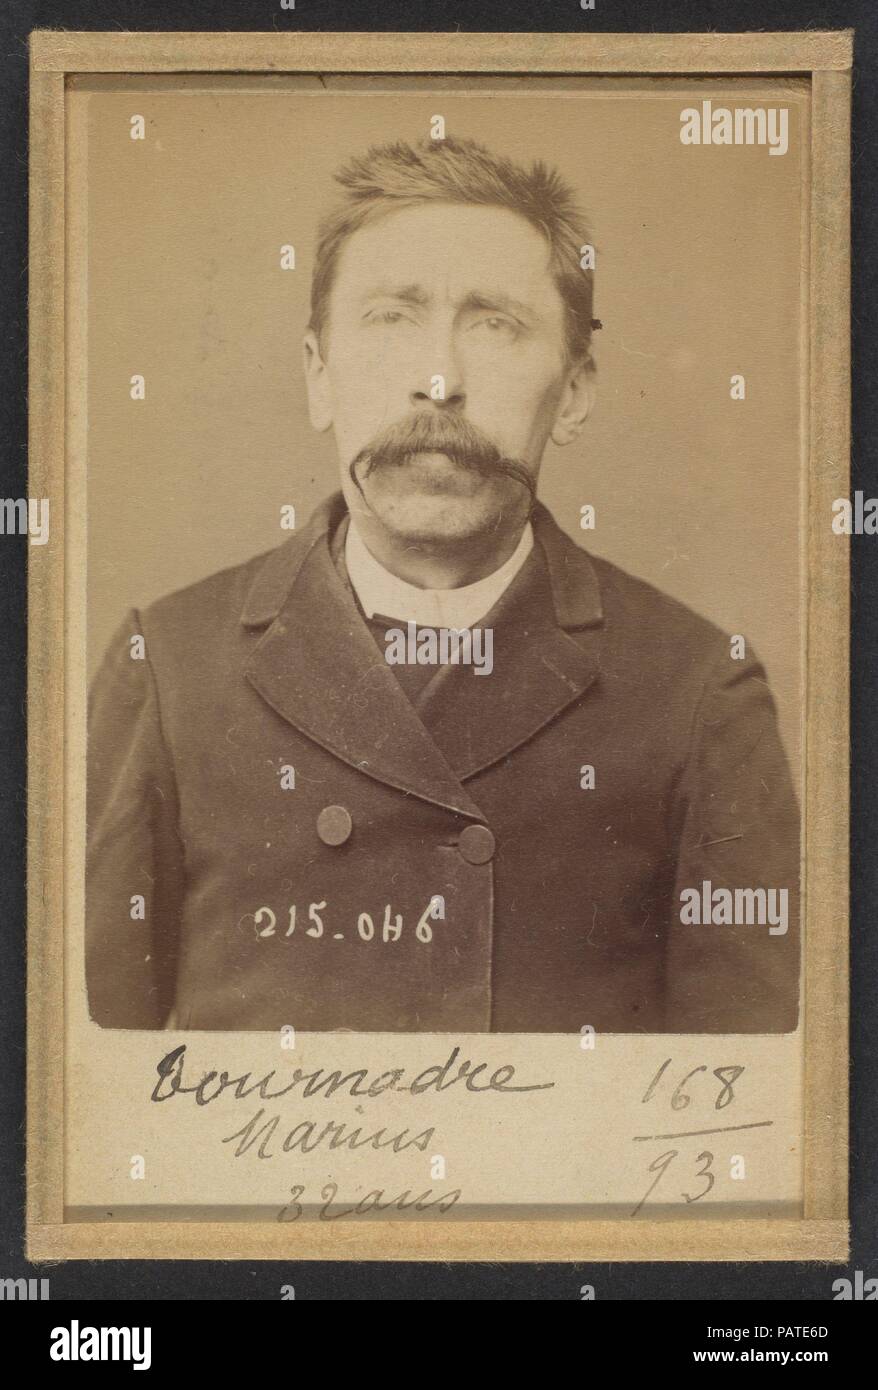 Tournadre. Jacques (ou Eugène). 32 ans, né à Marchal (Cantal). Journaliste. Anarchiste. 3/3/94. Artist: Alphonse Bertillon (French, 1853-1914). Dimensions: 10.5 x 7 x 0.5 cm (4 1/8 x 2 3/4 x 3/16 in.) each. Date: 1894.  Born into a distinguished family of scientists and statisticians, Bertillon began his career as a clerk in the Identification Bureau of the Paris Prefecture of Police in 1879. Tasked with maintaining reliable police records of offenders, he developed the first modern system of criminal identification. The system, which became known as Bertillonage, had three components: anthrop Stock Photo